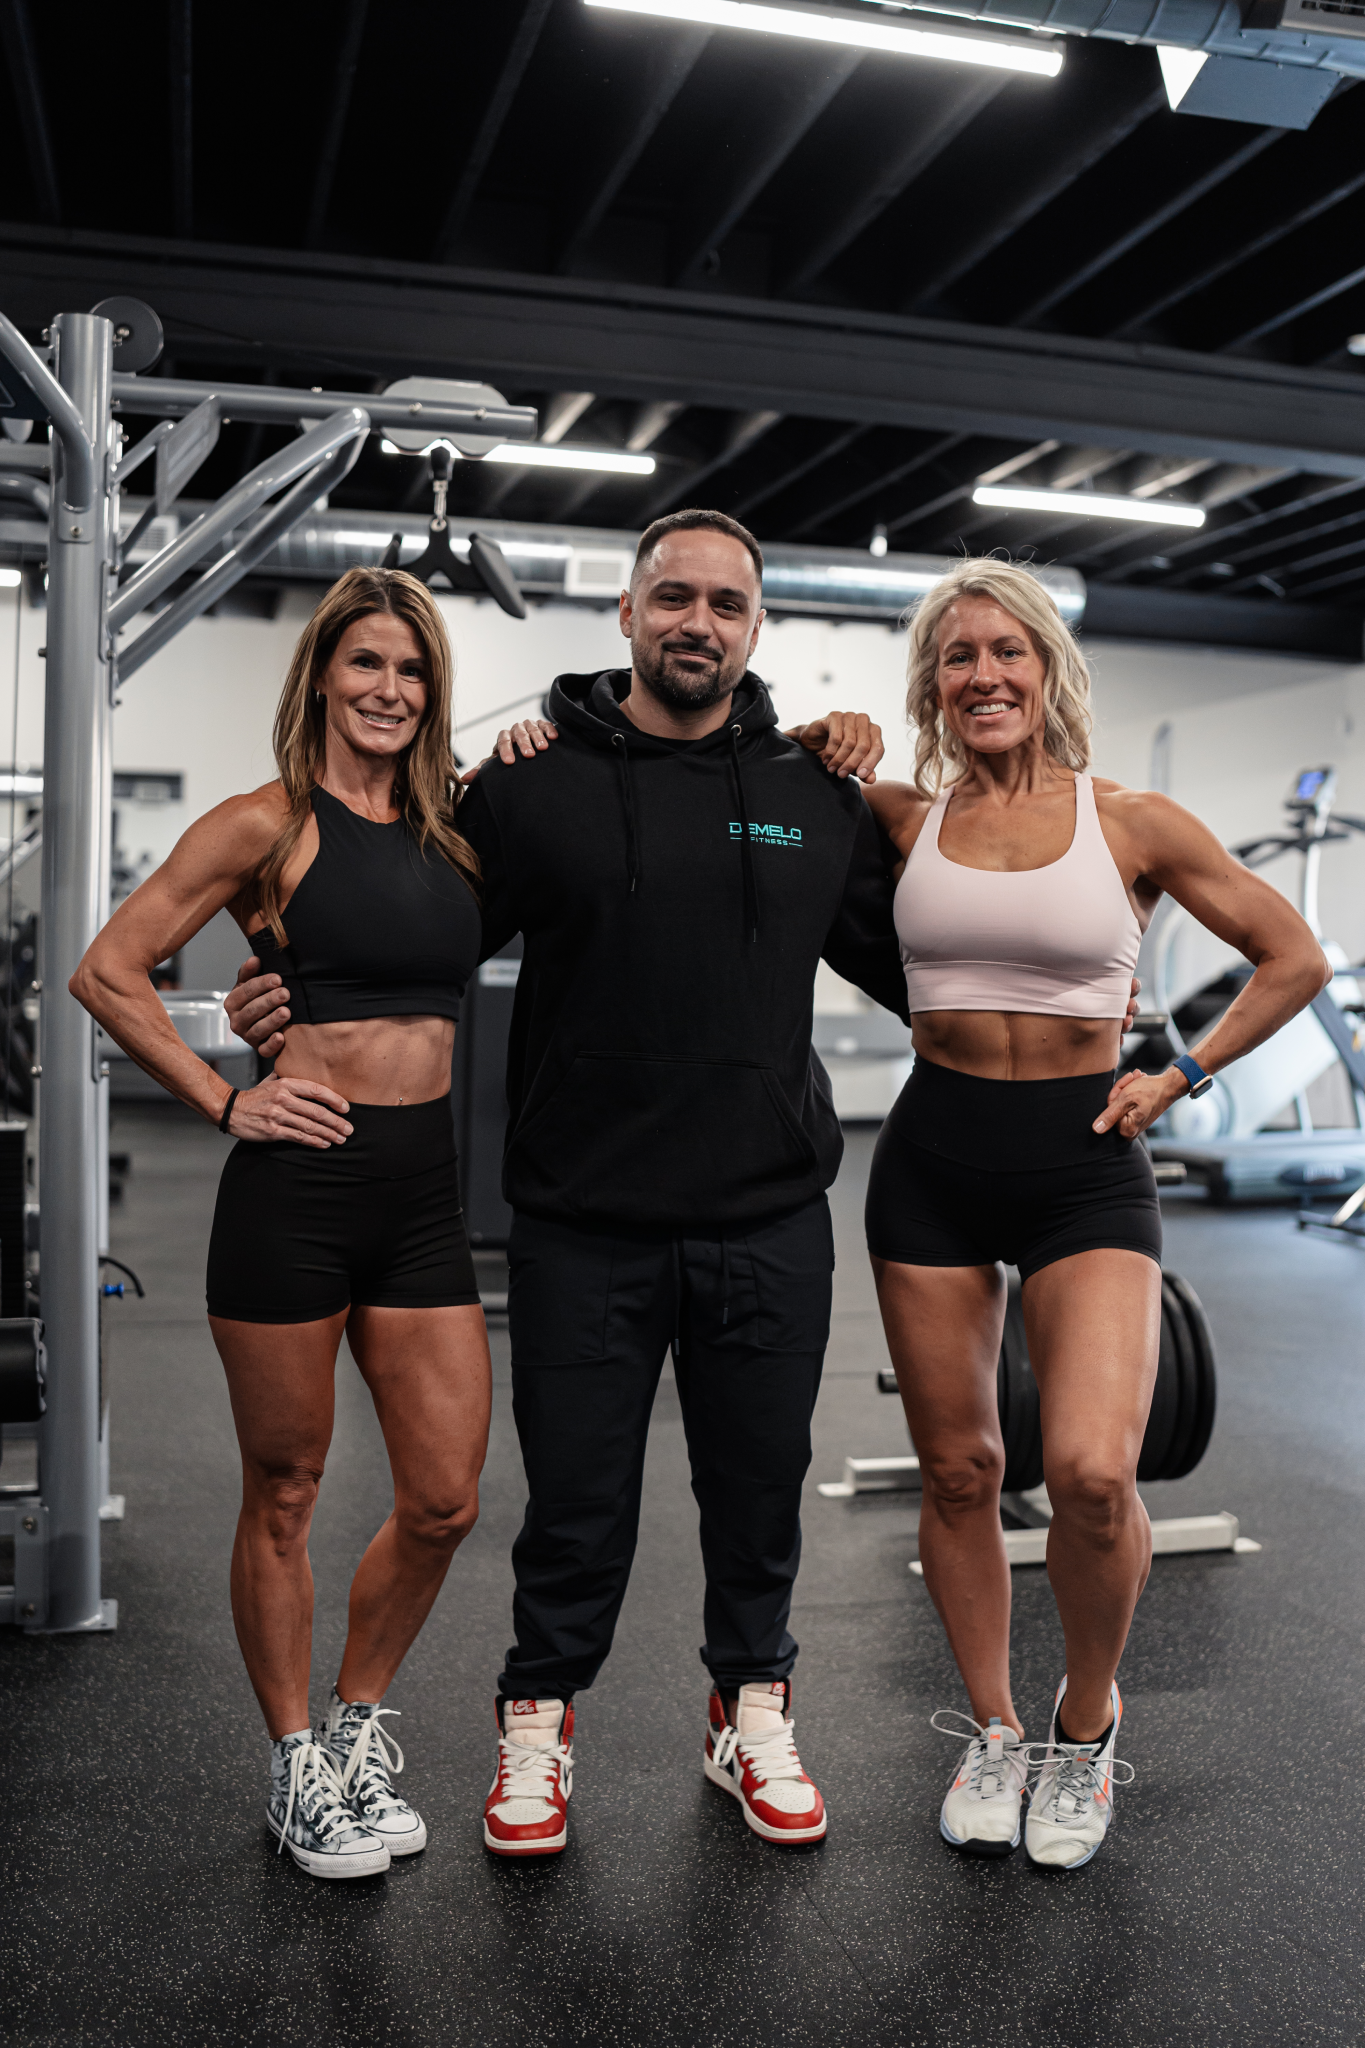 Three confident builders standing side by side. In the center is Josh DeMelo, owner and head trainer of DeMelo Fitness. Josh has two women beside him, one on either side.